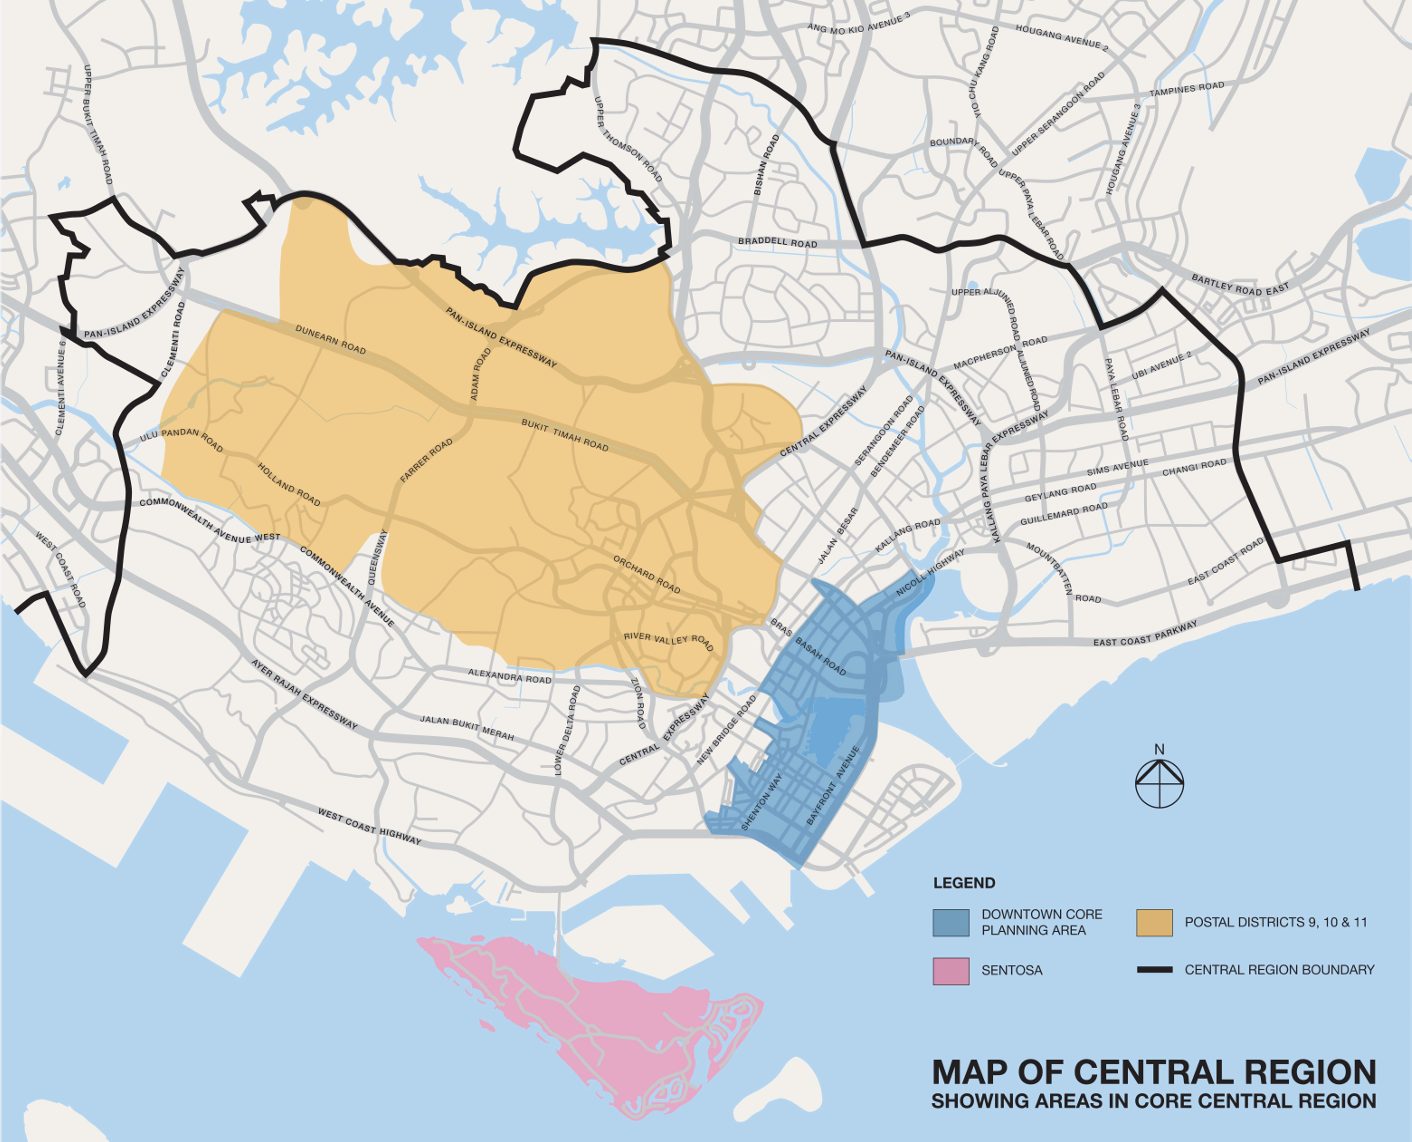 property market situation Singapore outlook map